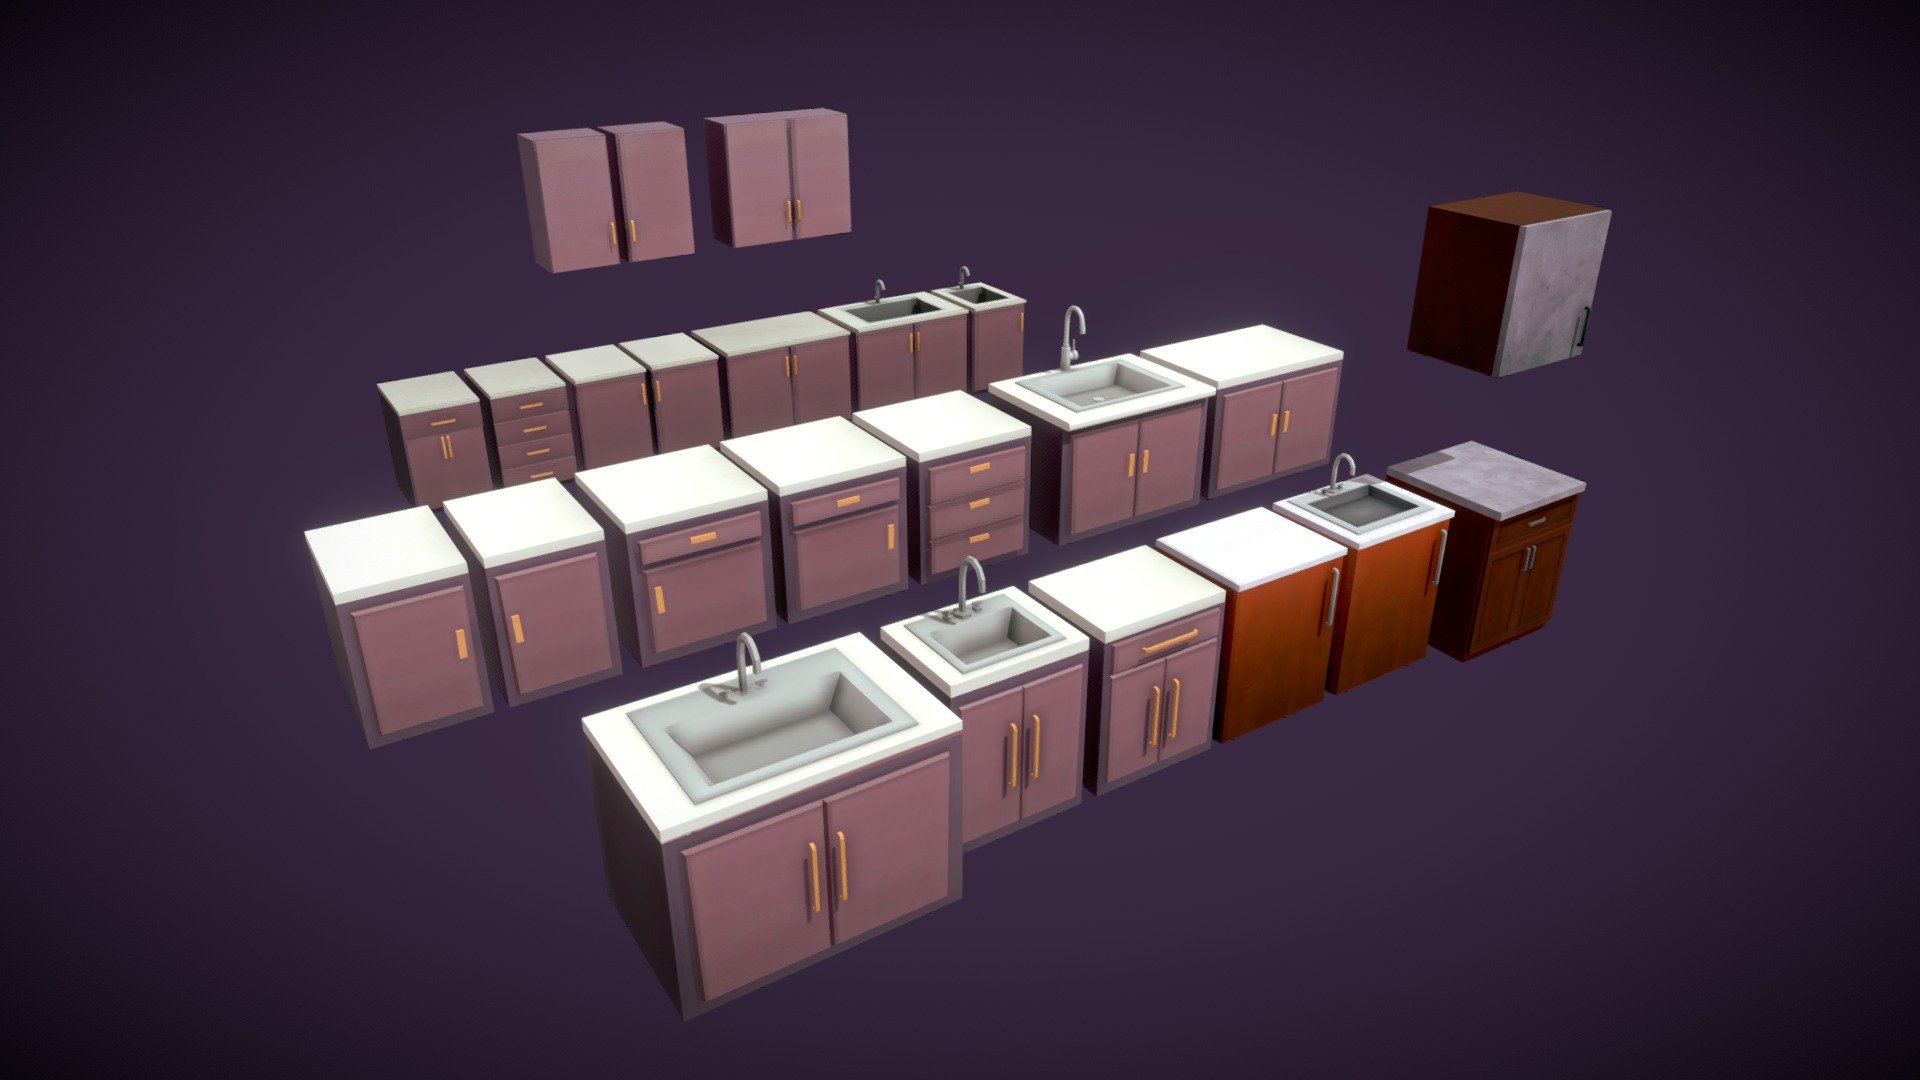 Stylised kitchen cabinets, counters, sinks 3d model